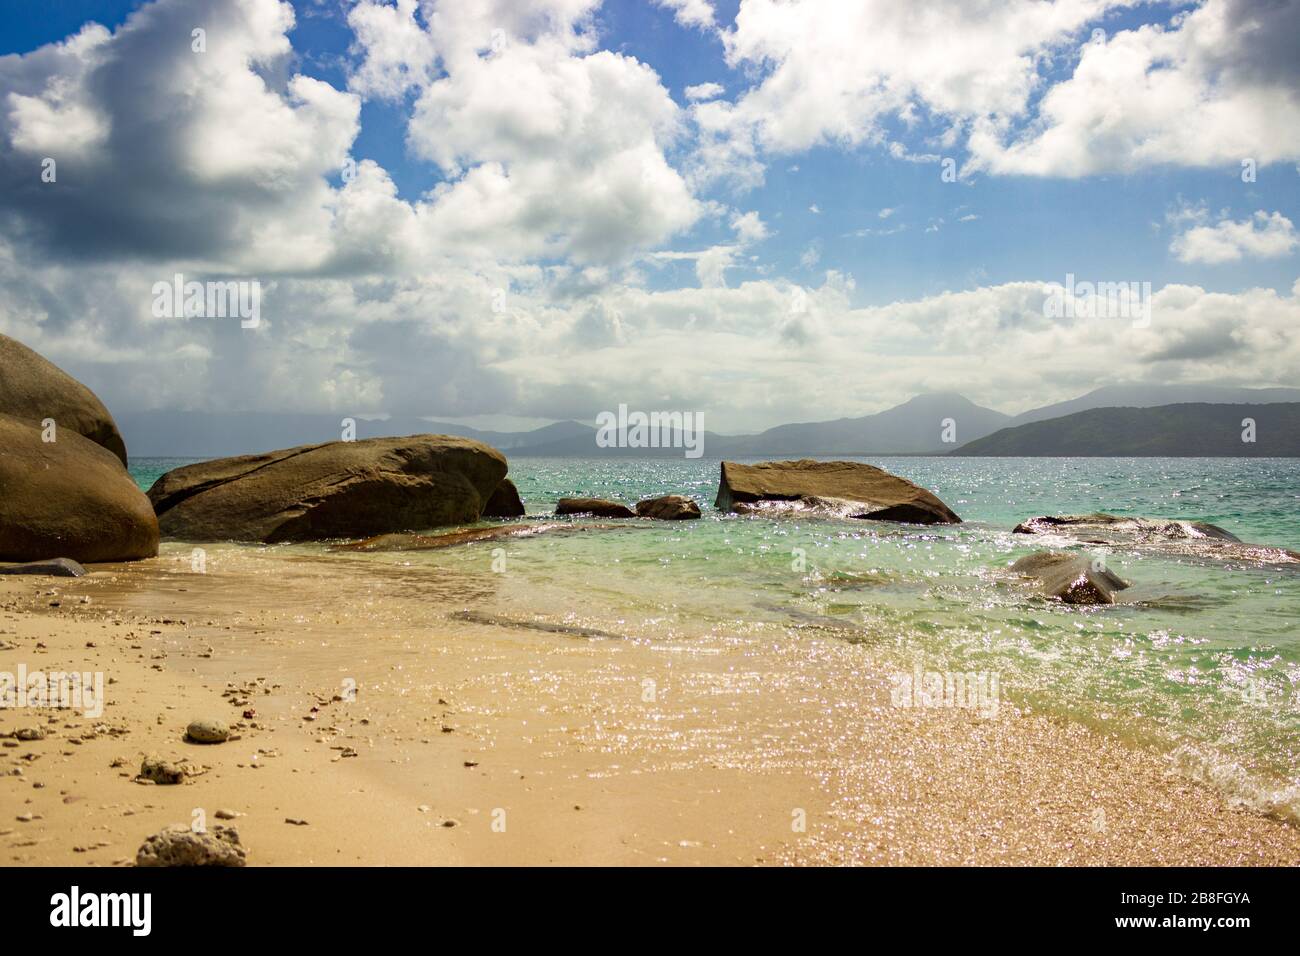 Nudey Beach, Fitzroy Island, rocks break through the crystal clear waters of the Coral Sea with the coast of Queensland Australia in the background. Stock Photo